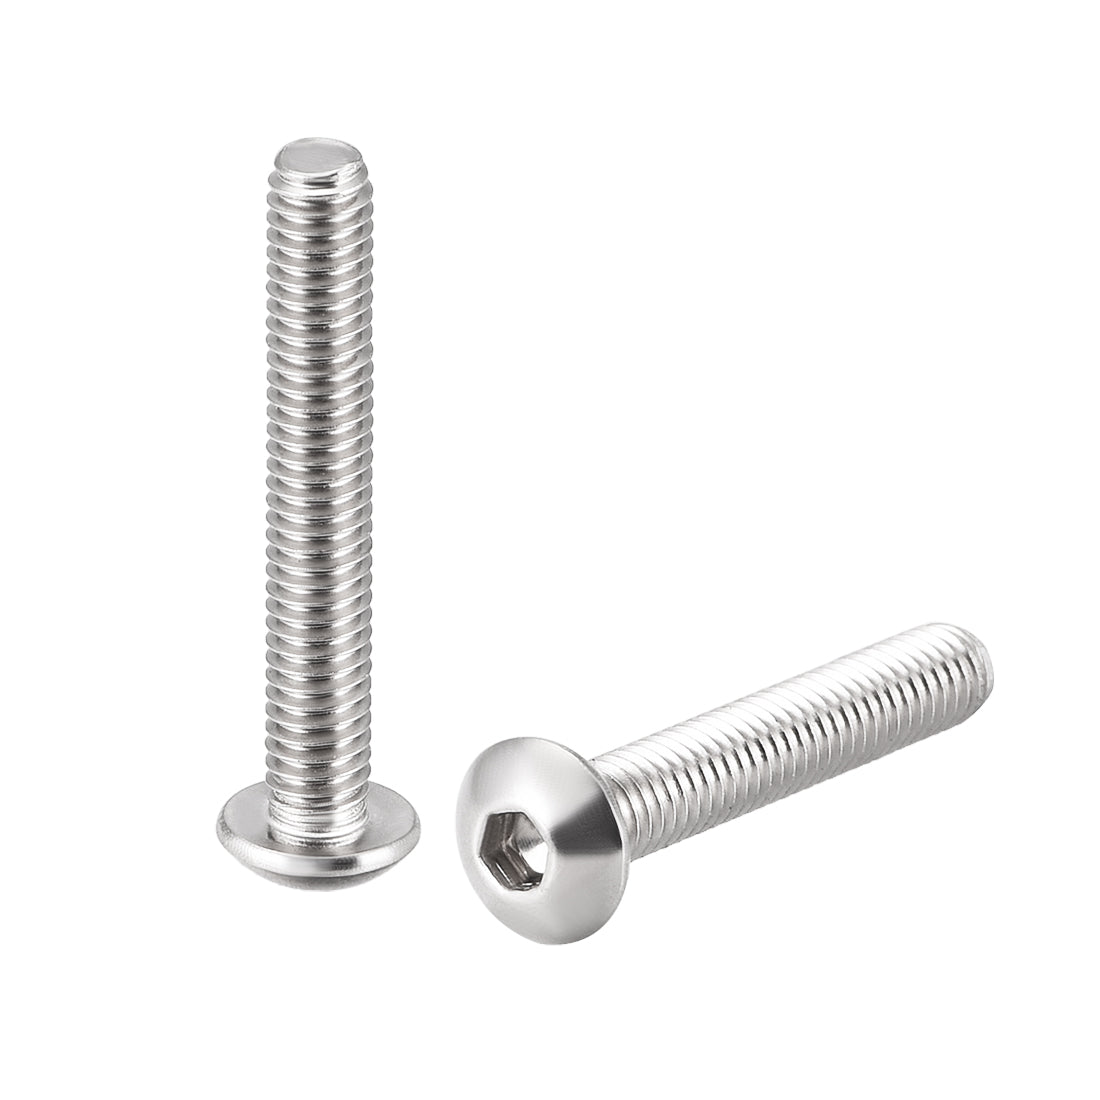 uxcell Uxcell M4x25mm Machine Screws Hex Socket Round Head Screw 304 Stainless Steel Fasteners Bolts 20pcs